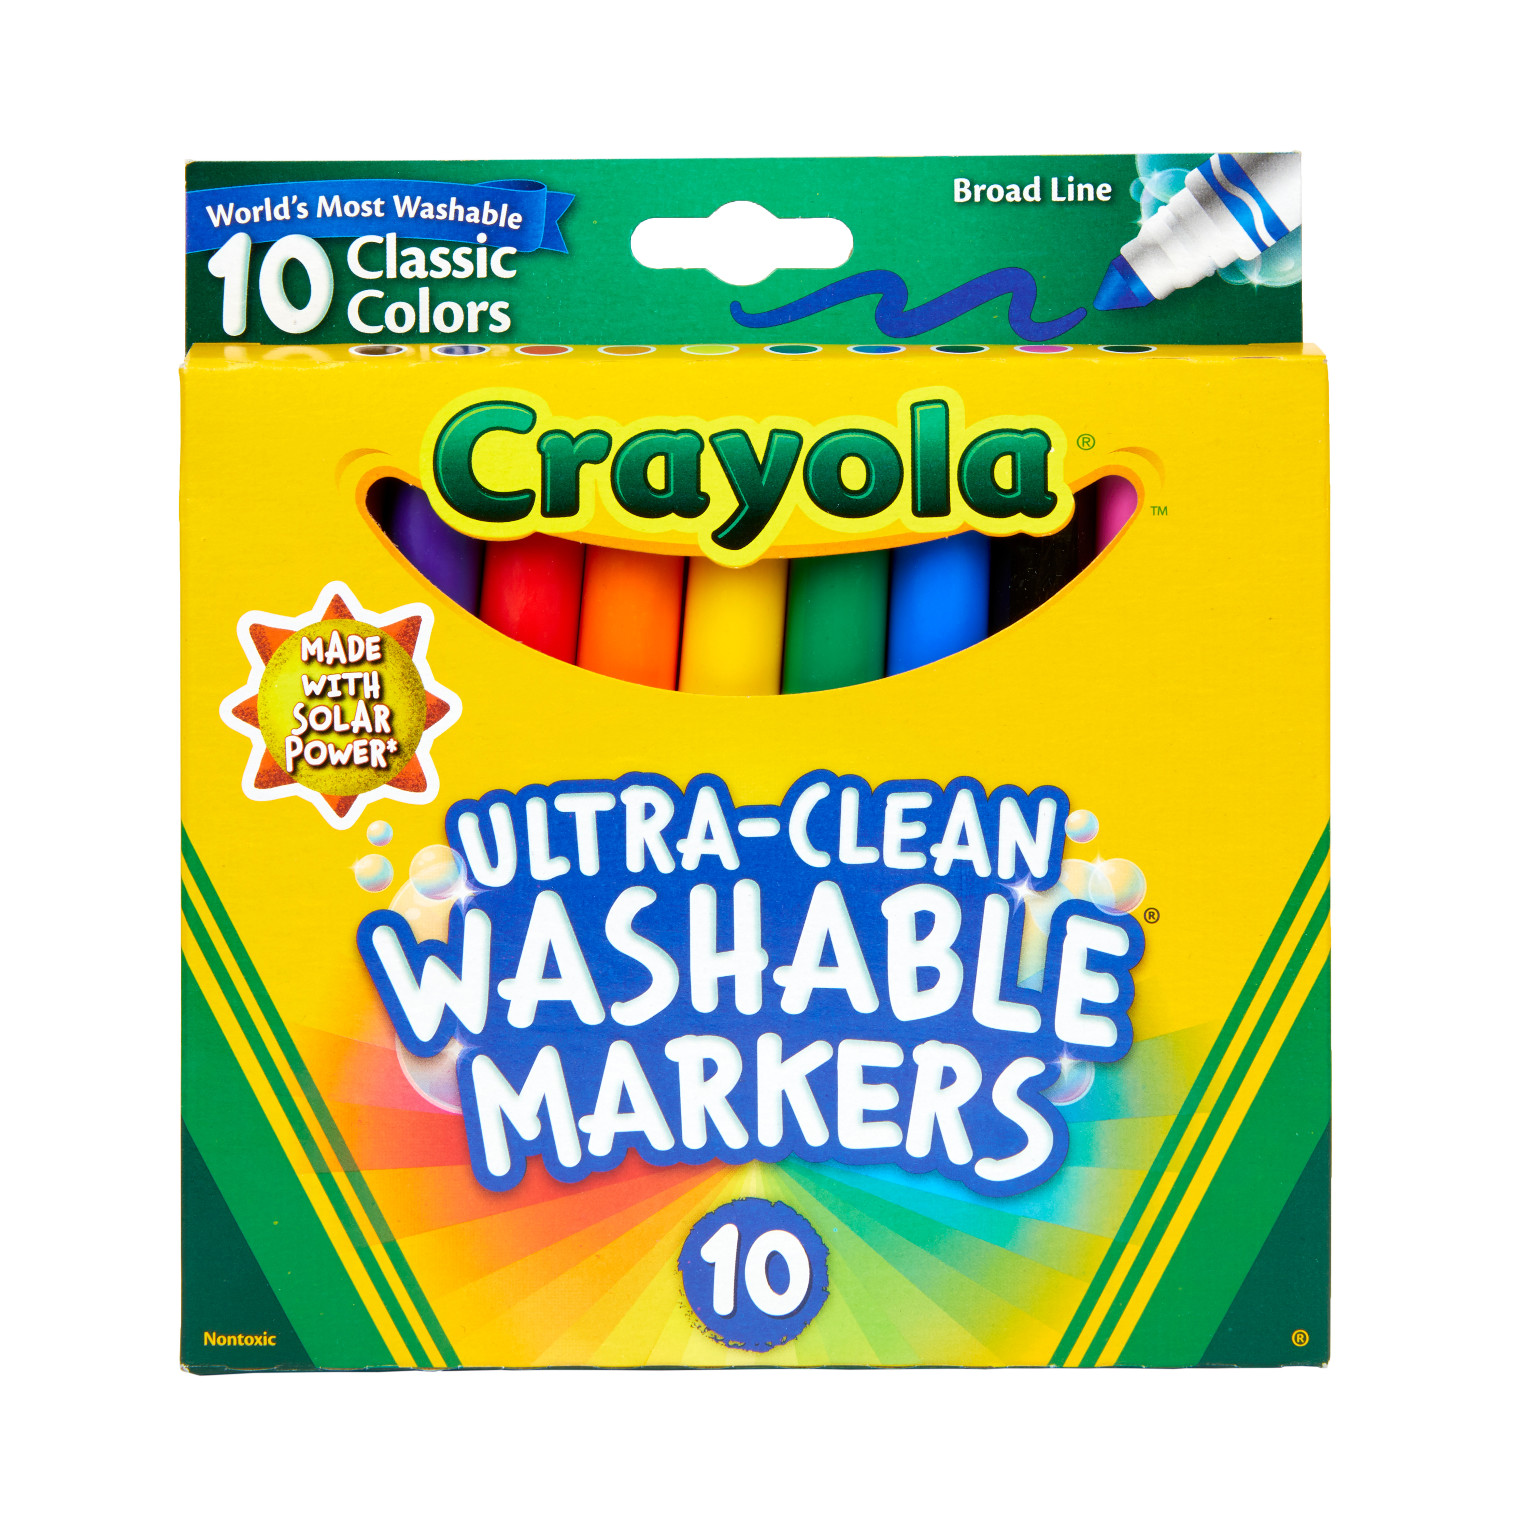 200 pc Crayola Fine Tip Washable Markers (10 colors